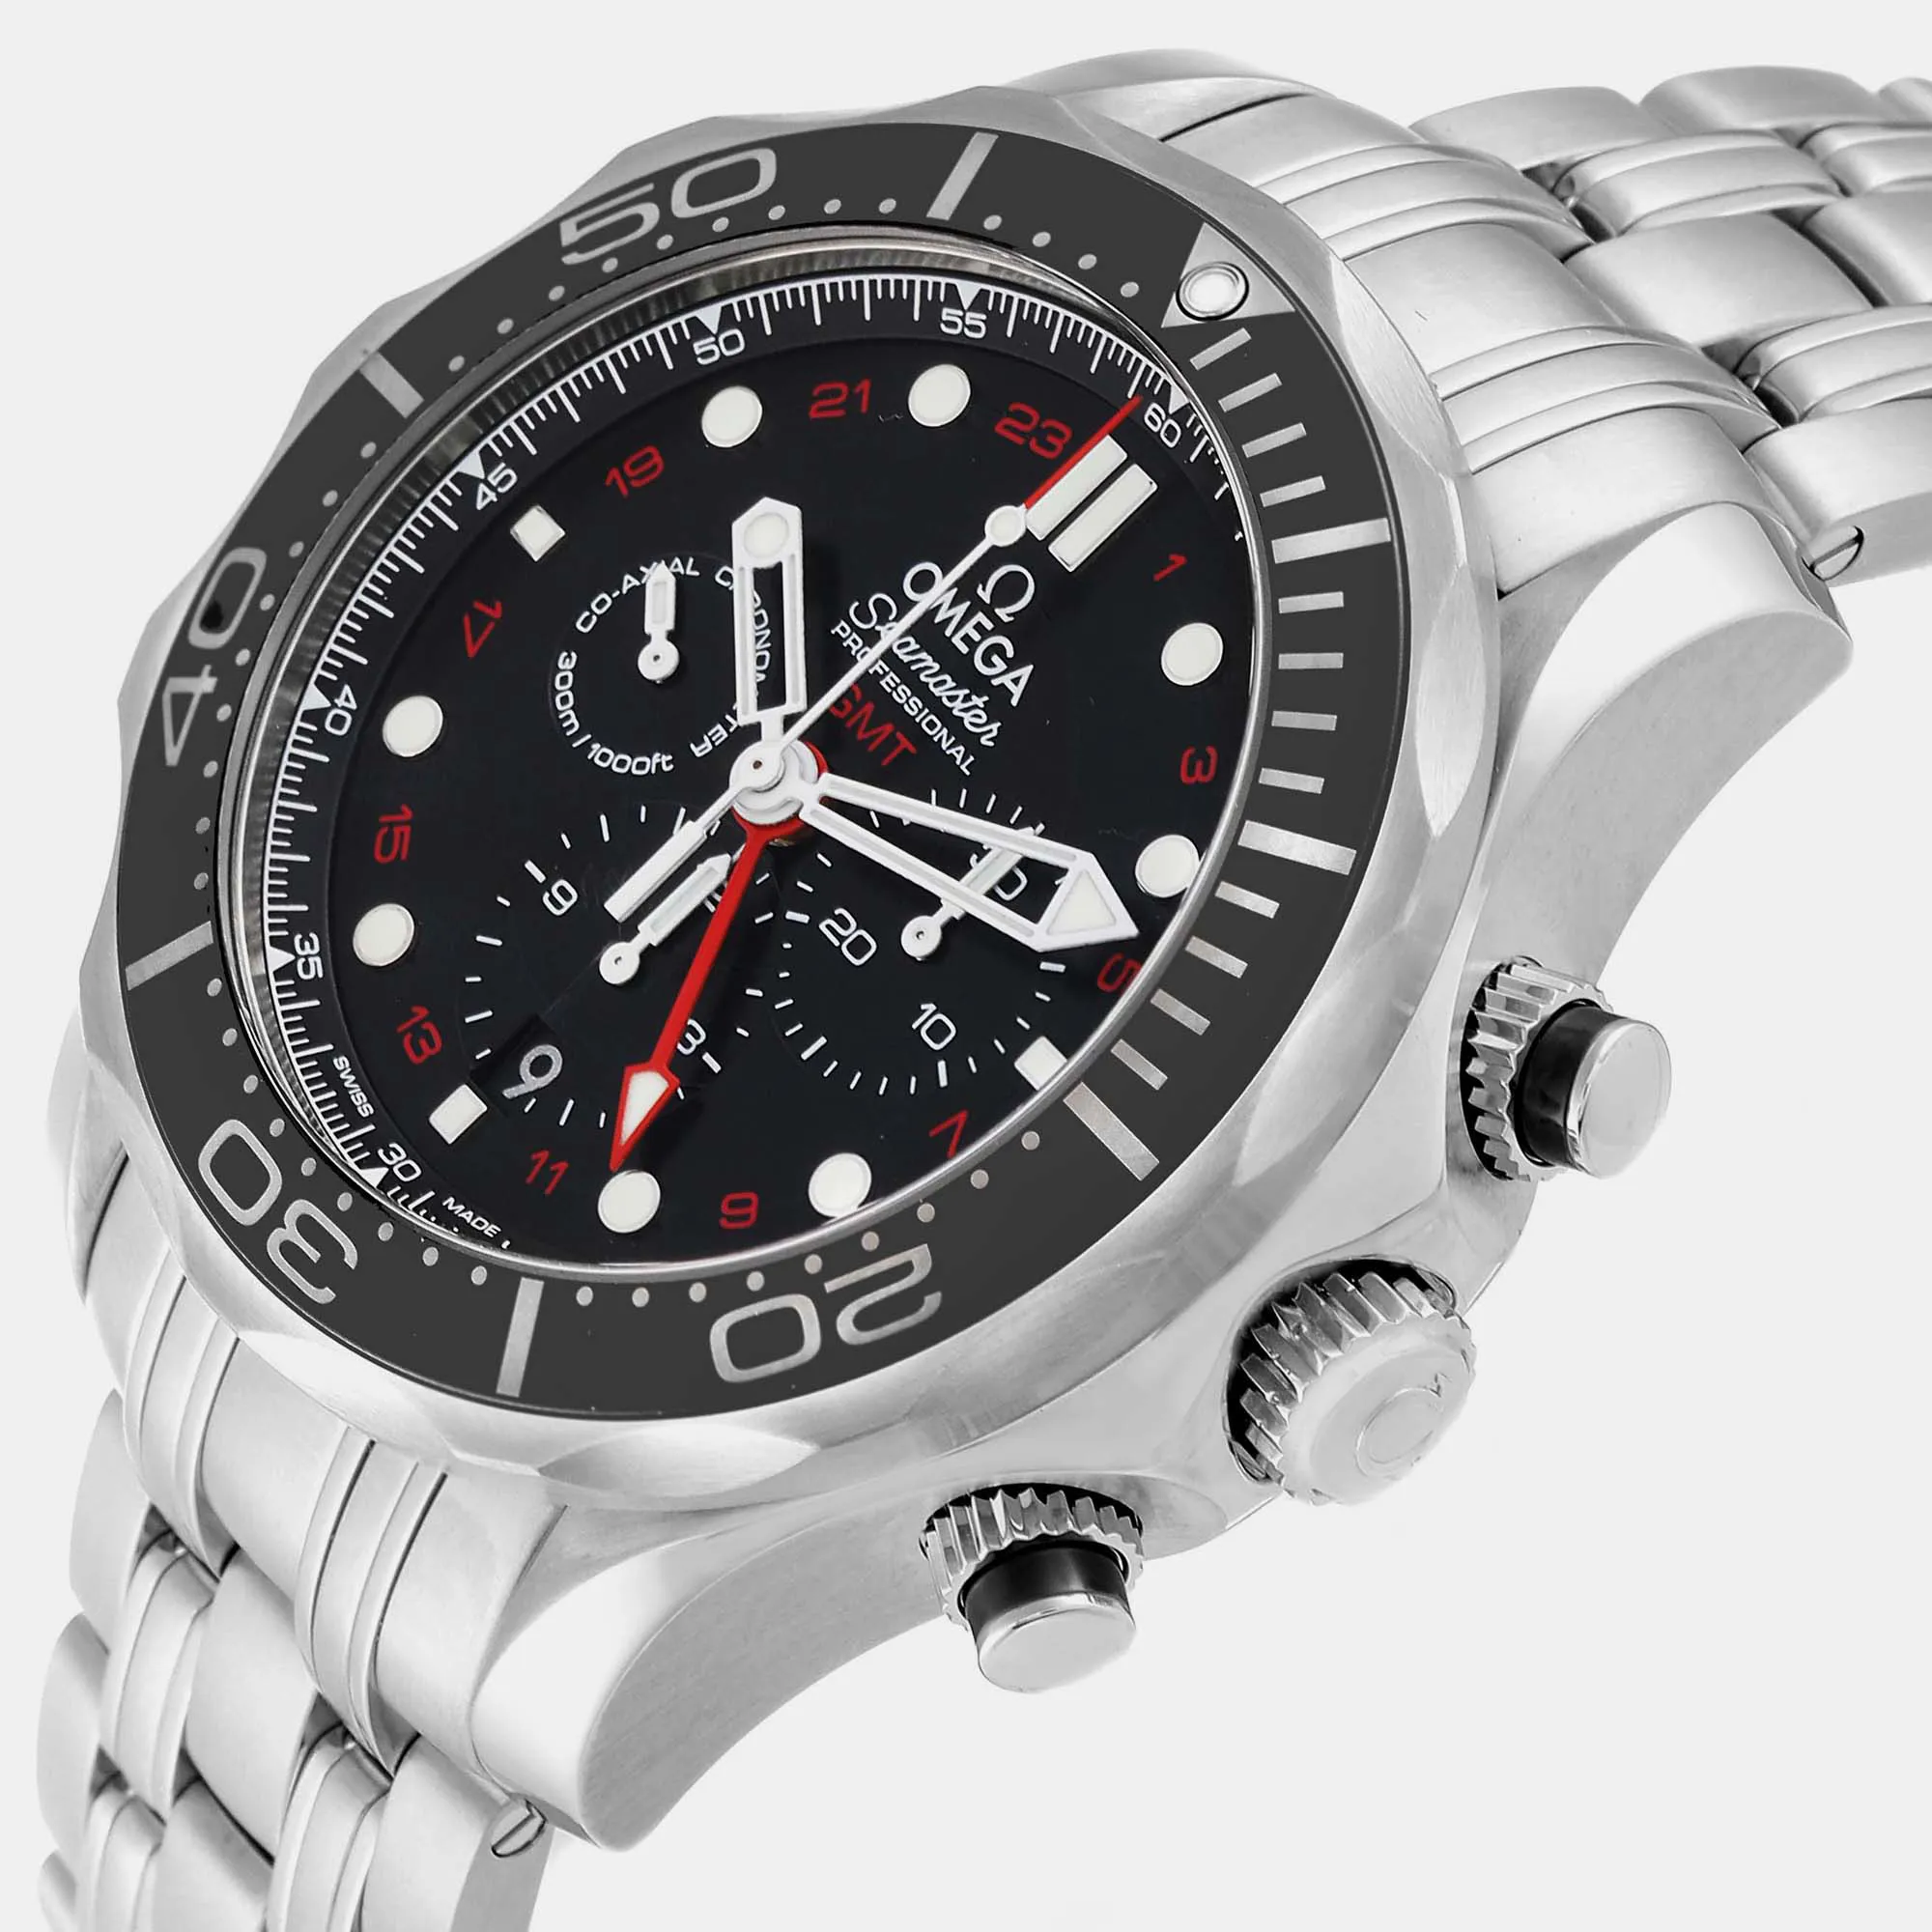 Omega Seamaster Diver 300M 212.30.44.52.01.001 44mm Stainless steel 3